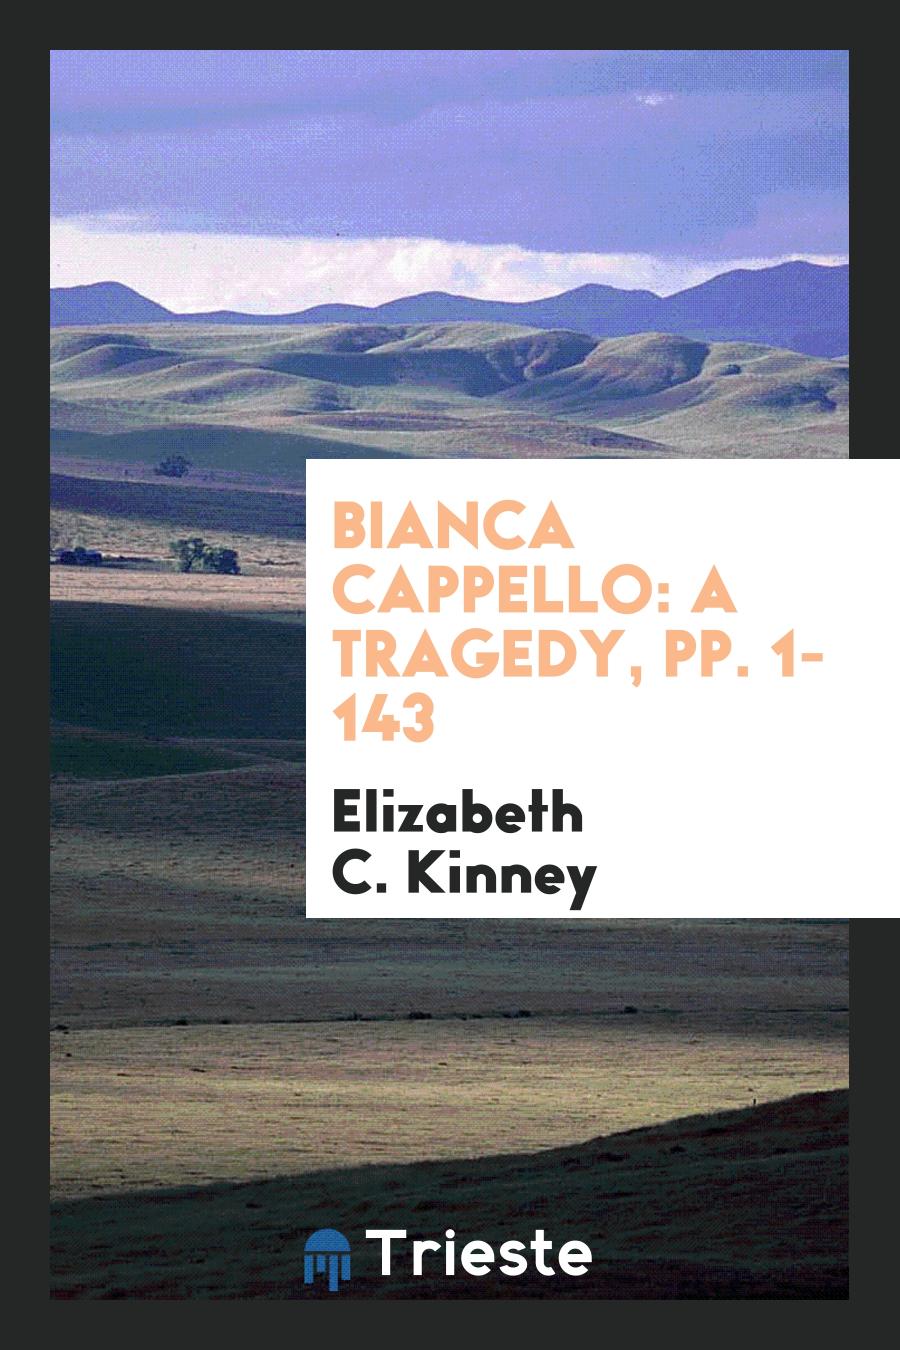 Bianca Cappello: A Tragedy, pp. 1-143